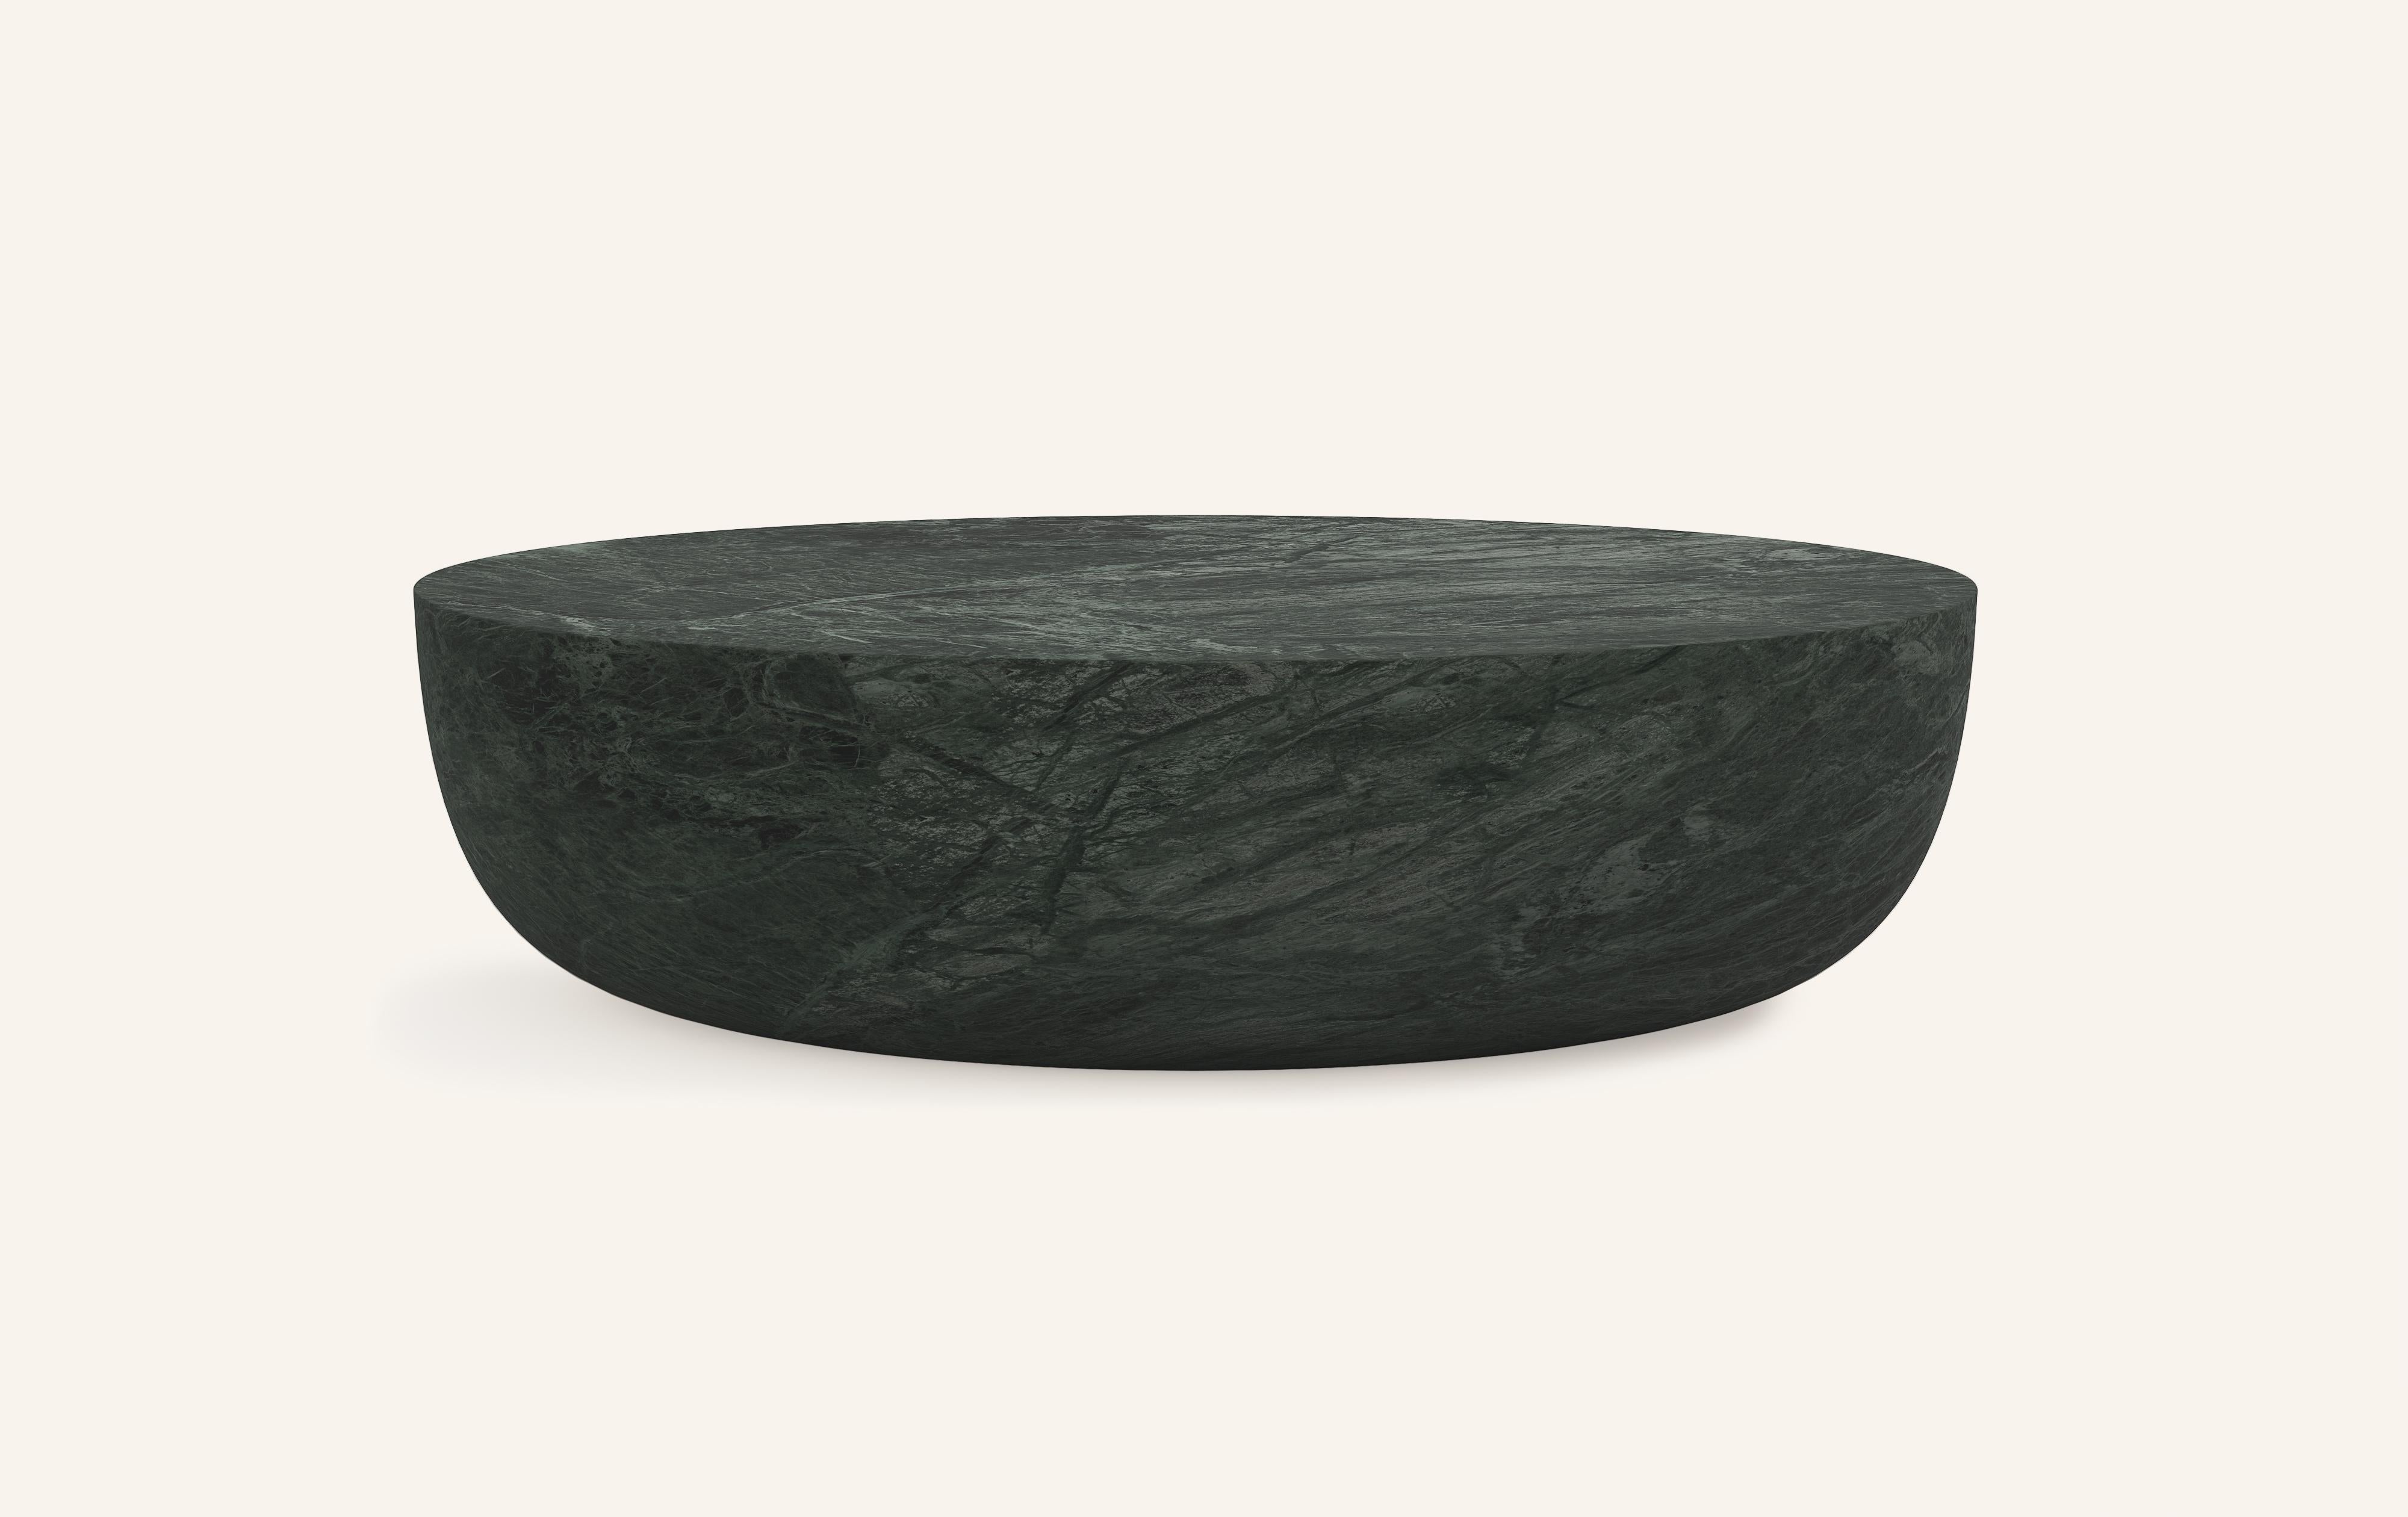 A SLICE OF A ’SPHERE’ OR 'SFERA' IN ITALIAN BALANCES A FLAT SURFACE ATOP AND ROBUST MONOLITH FORM. WITH A BASE SOFTENED BY A CURVED PROFILE, SFERA IS SOFT AND EARTHY IN ITS AVAILABLE STONE SELECTIONS.

DIMENSIONS: 
72”L x 48”W x 16”H: 
- SOLID BLOCK